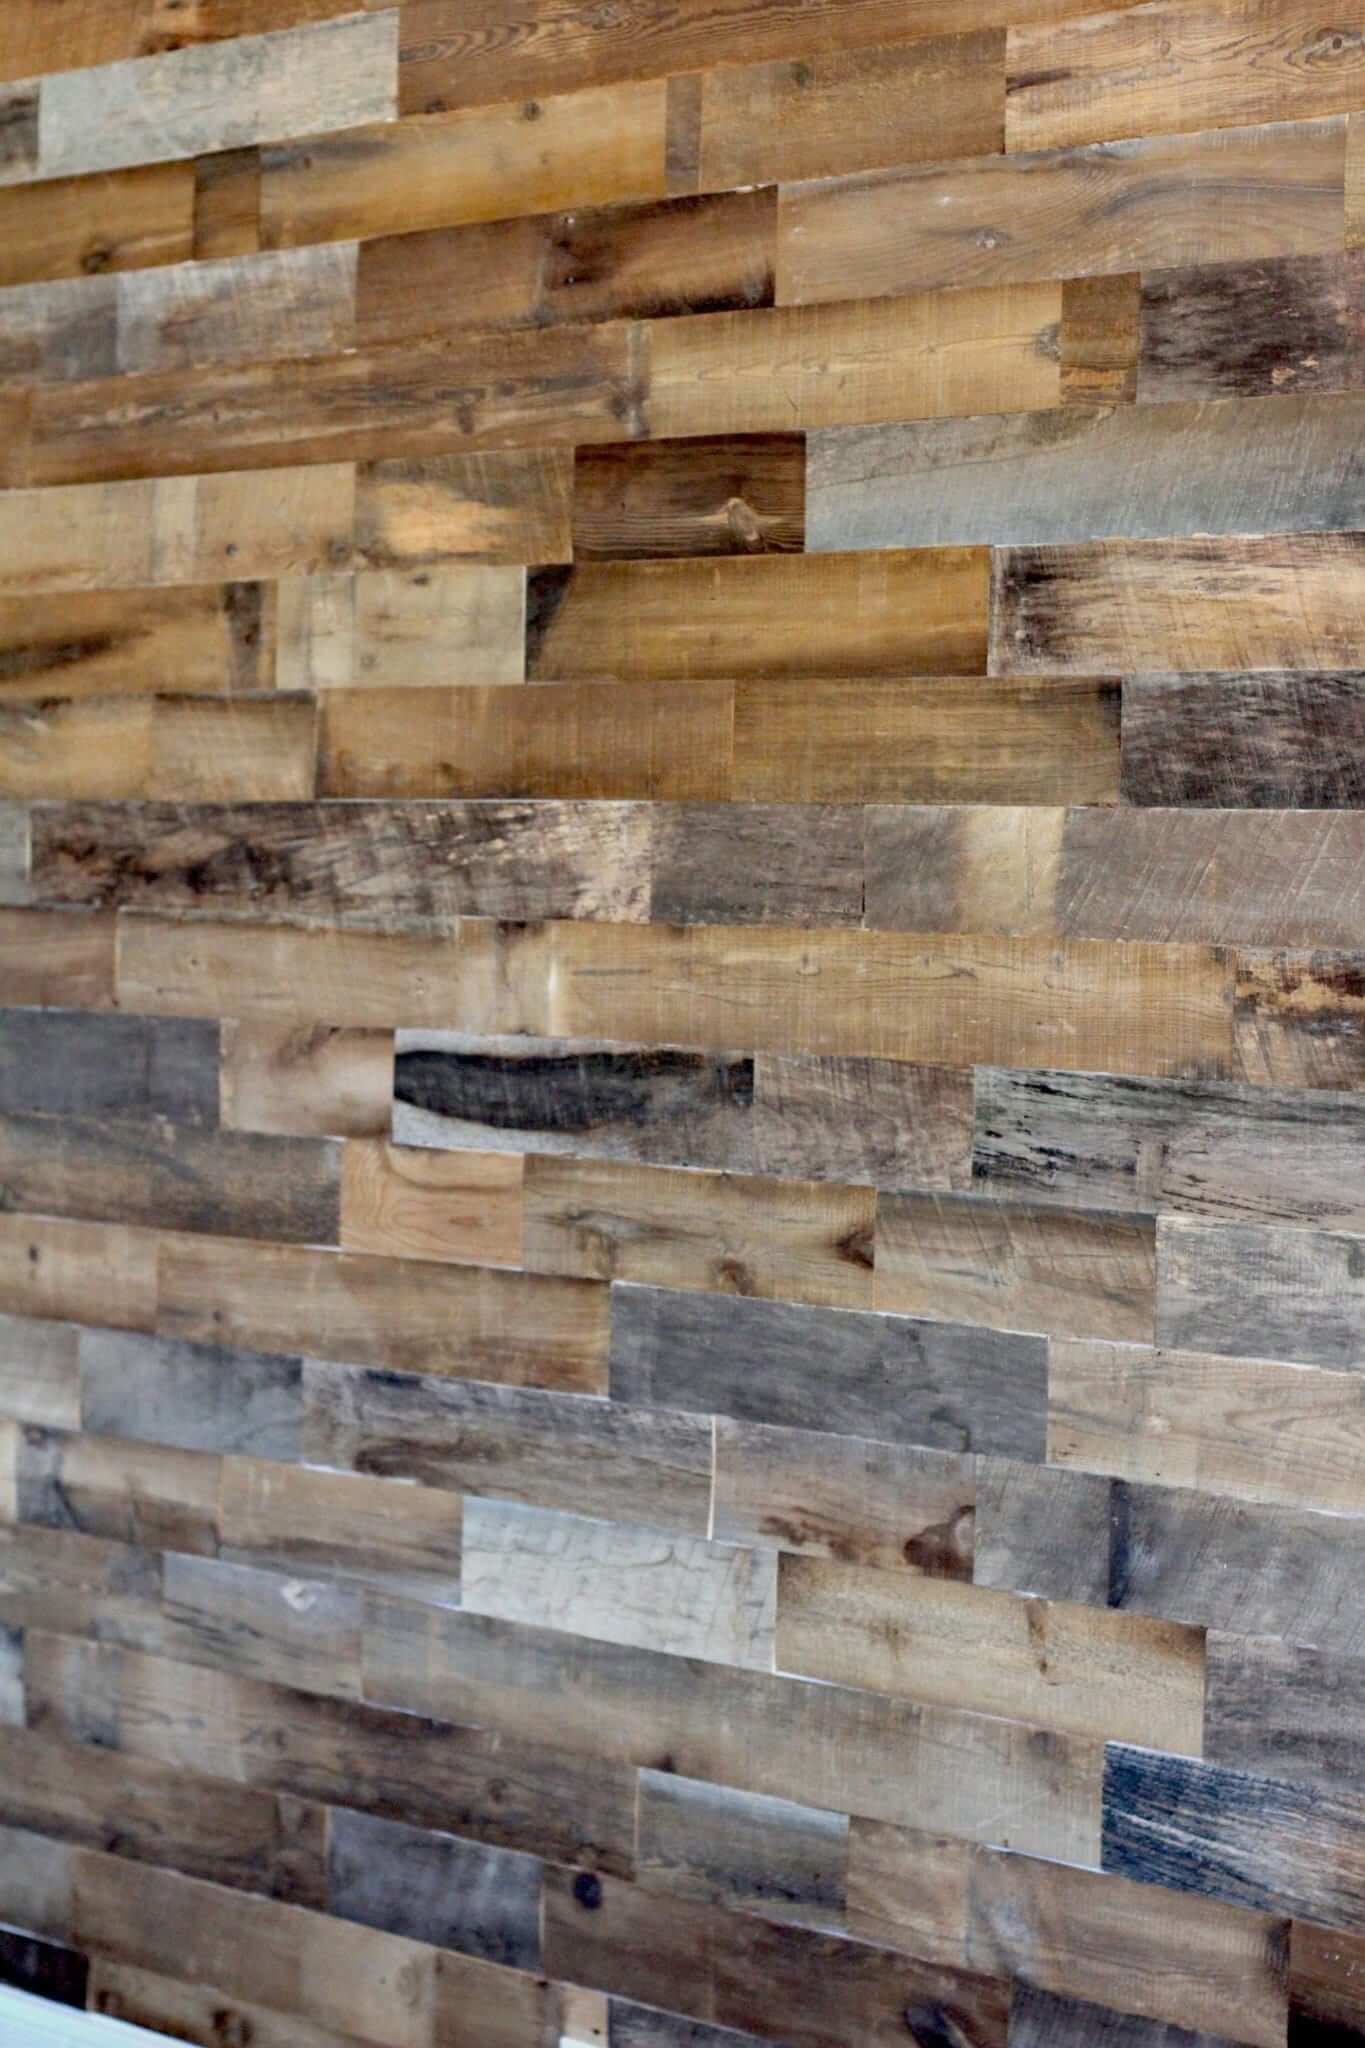 Artis Wall - Easiest Reclaimed Wood Wall Ever!